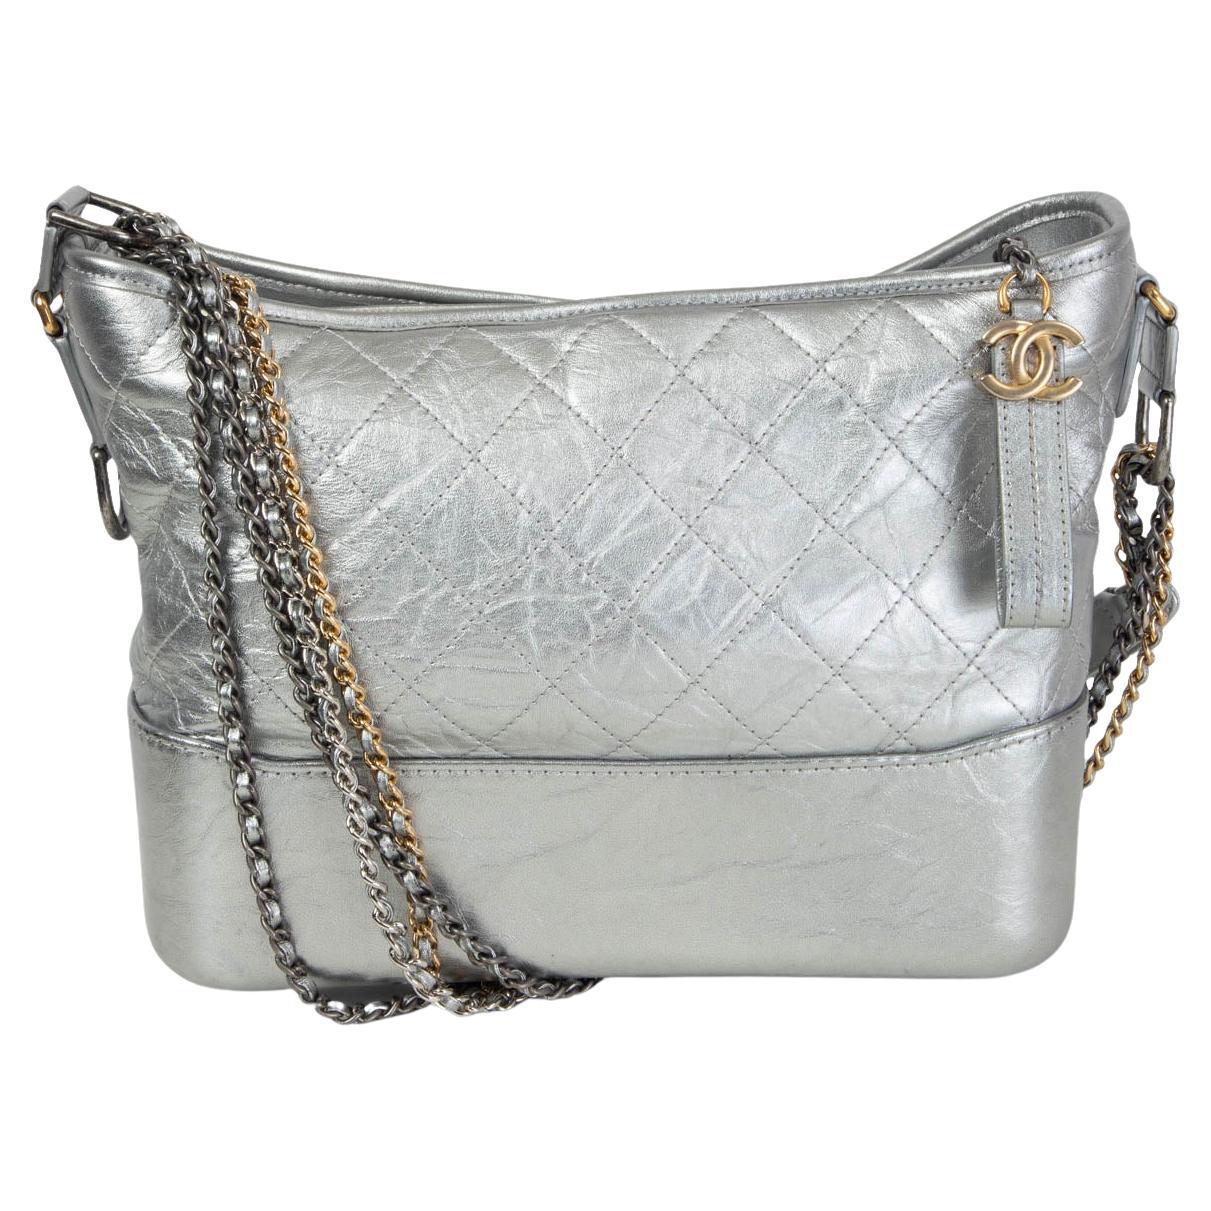 CHANEL metallic silver quilted leather 2017 GABRIELLE MEDIUM HOBO Shoulder Bag